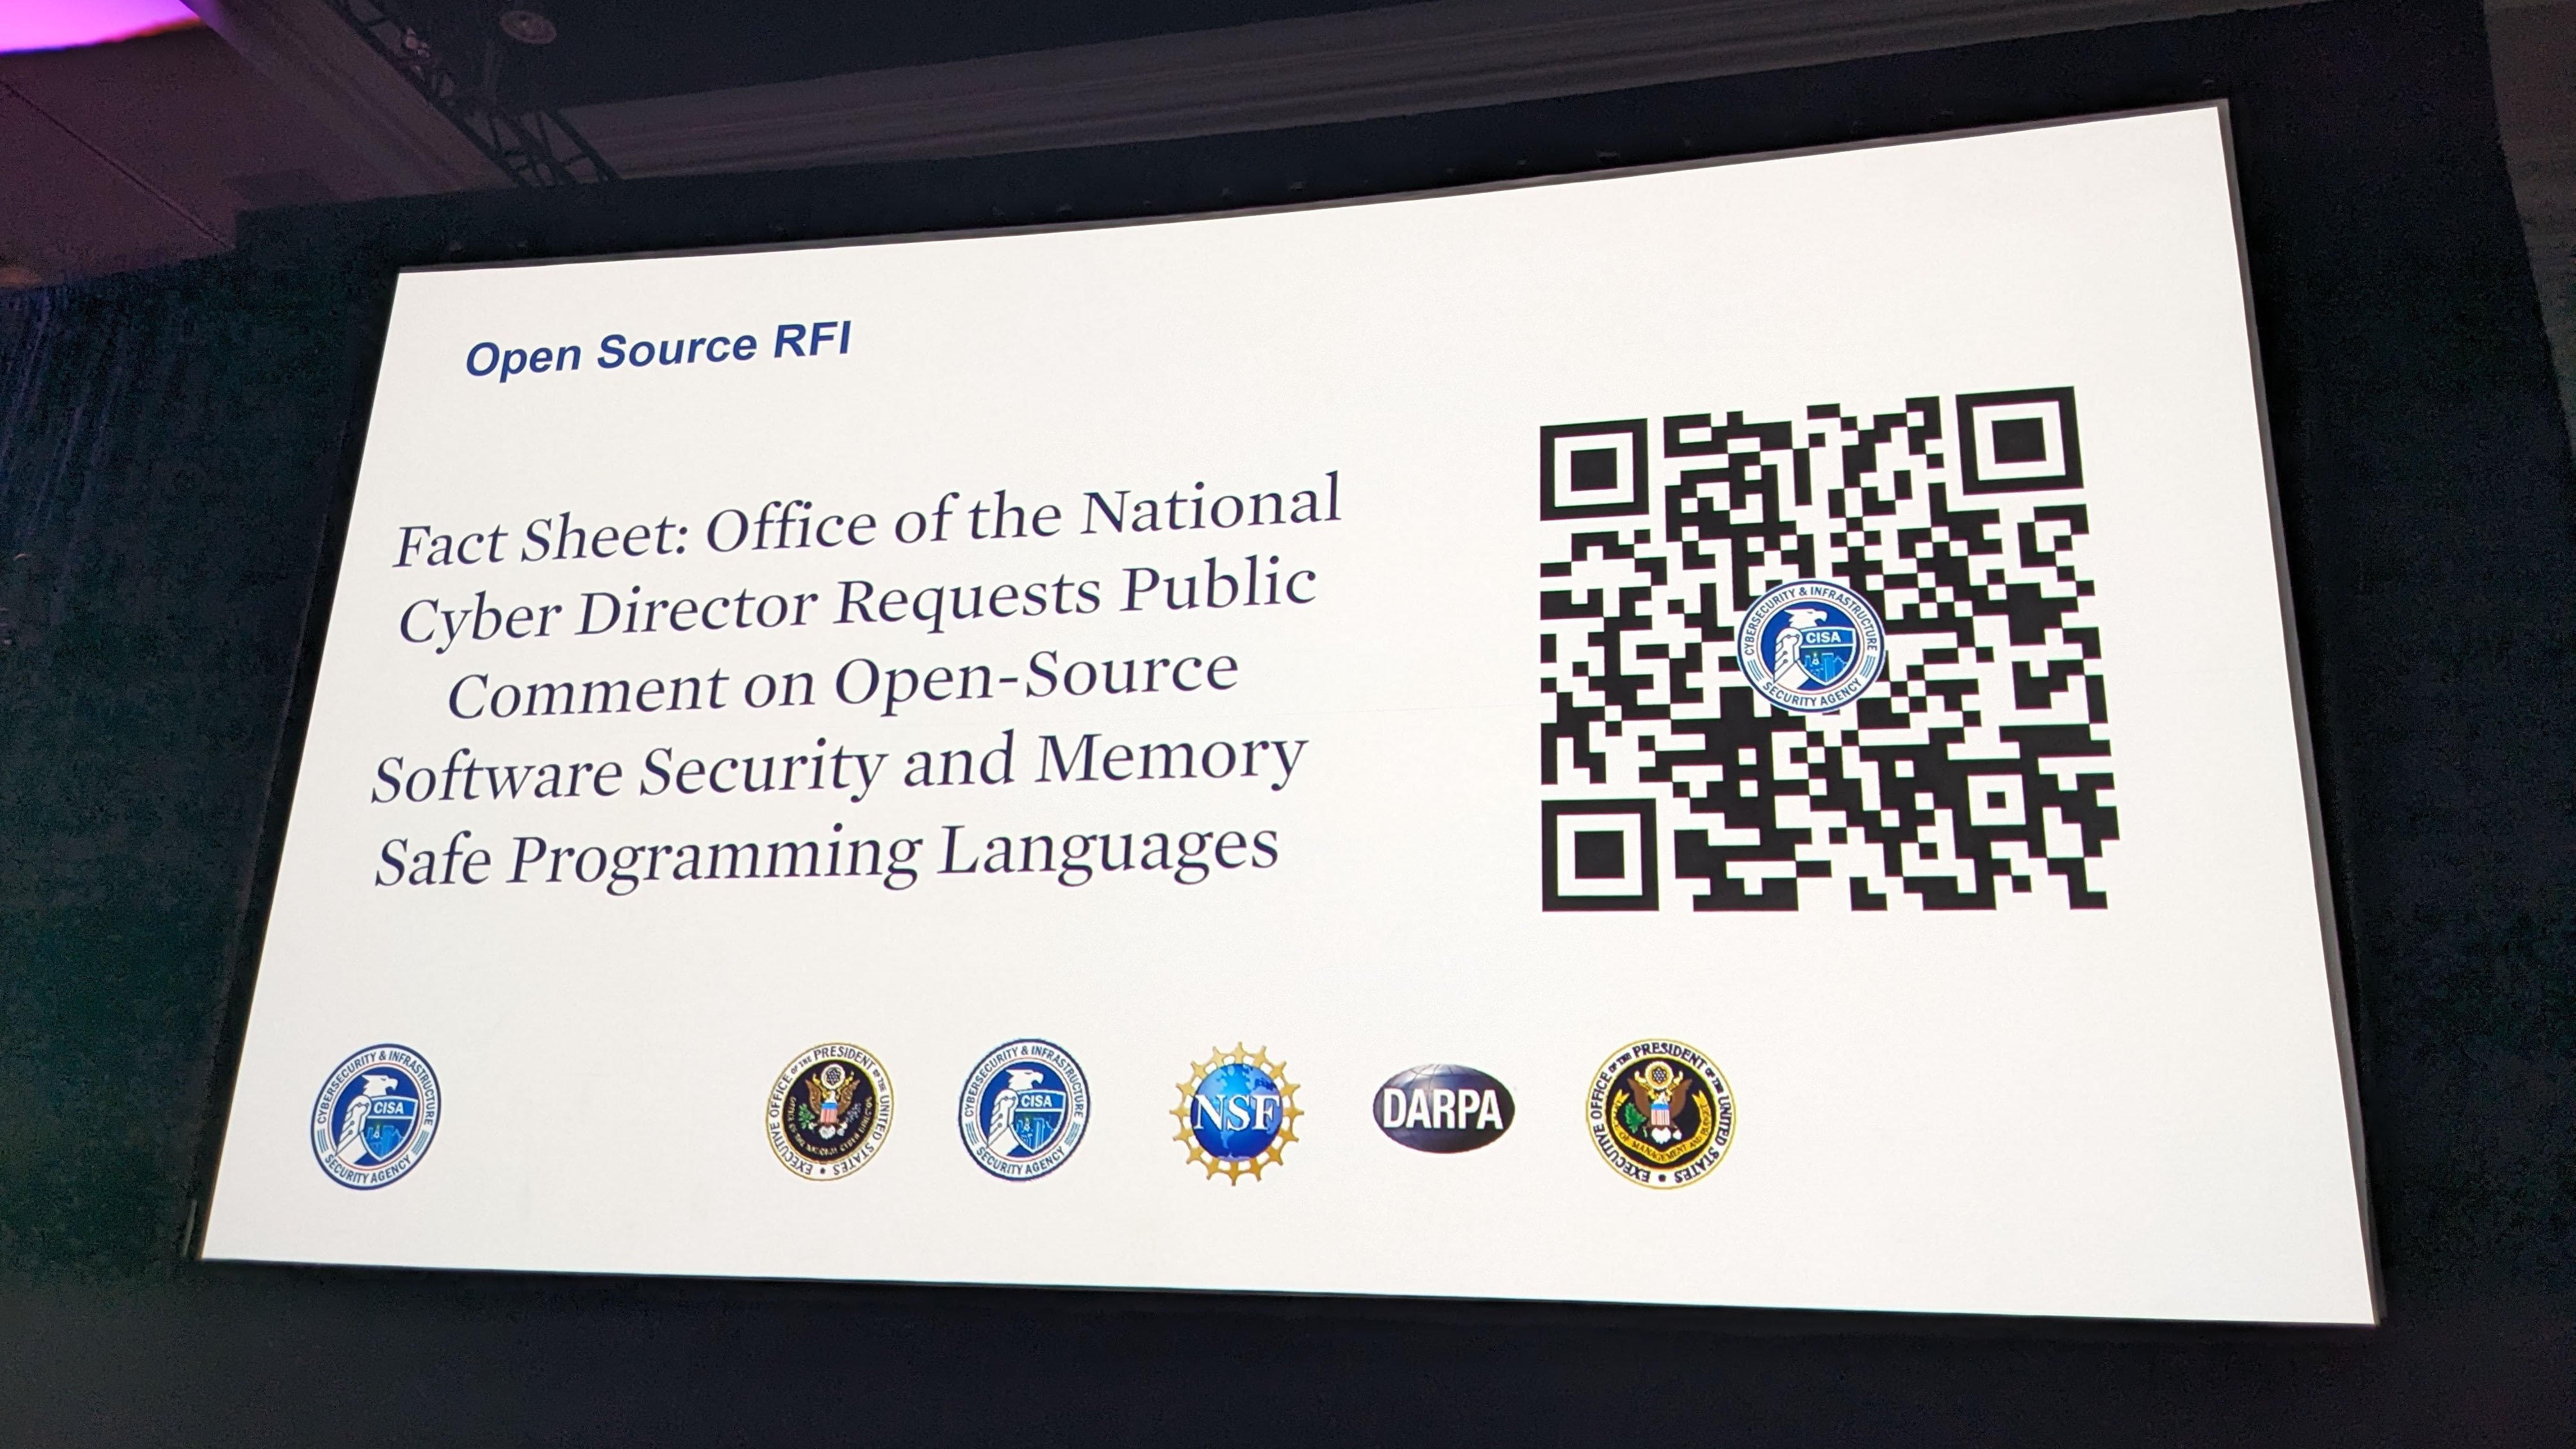 Slide presented during the CISA talk features a QR code linking to the White House RFI on memory-safe languages and open-source security